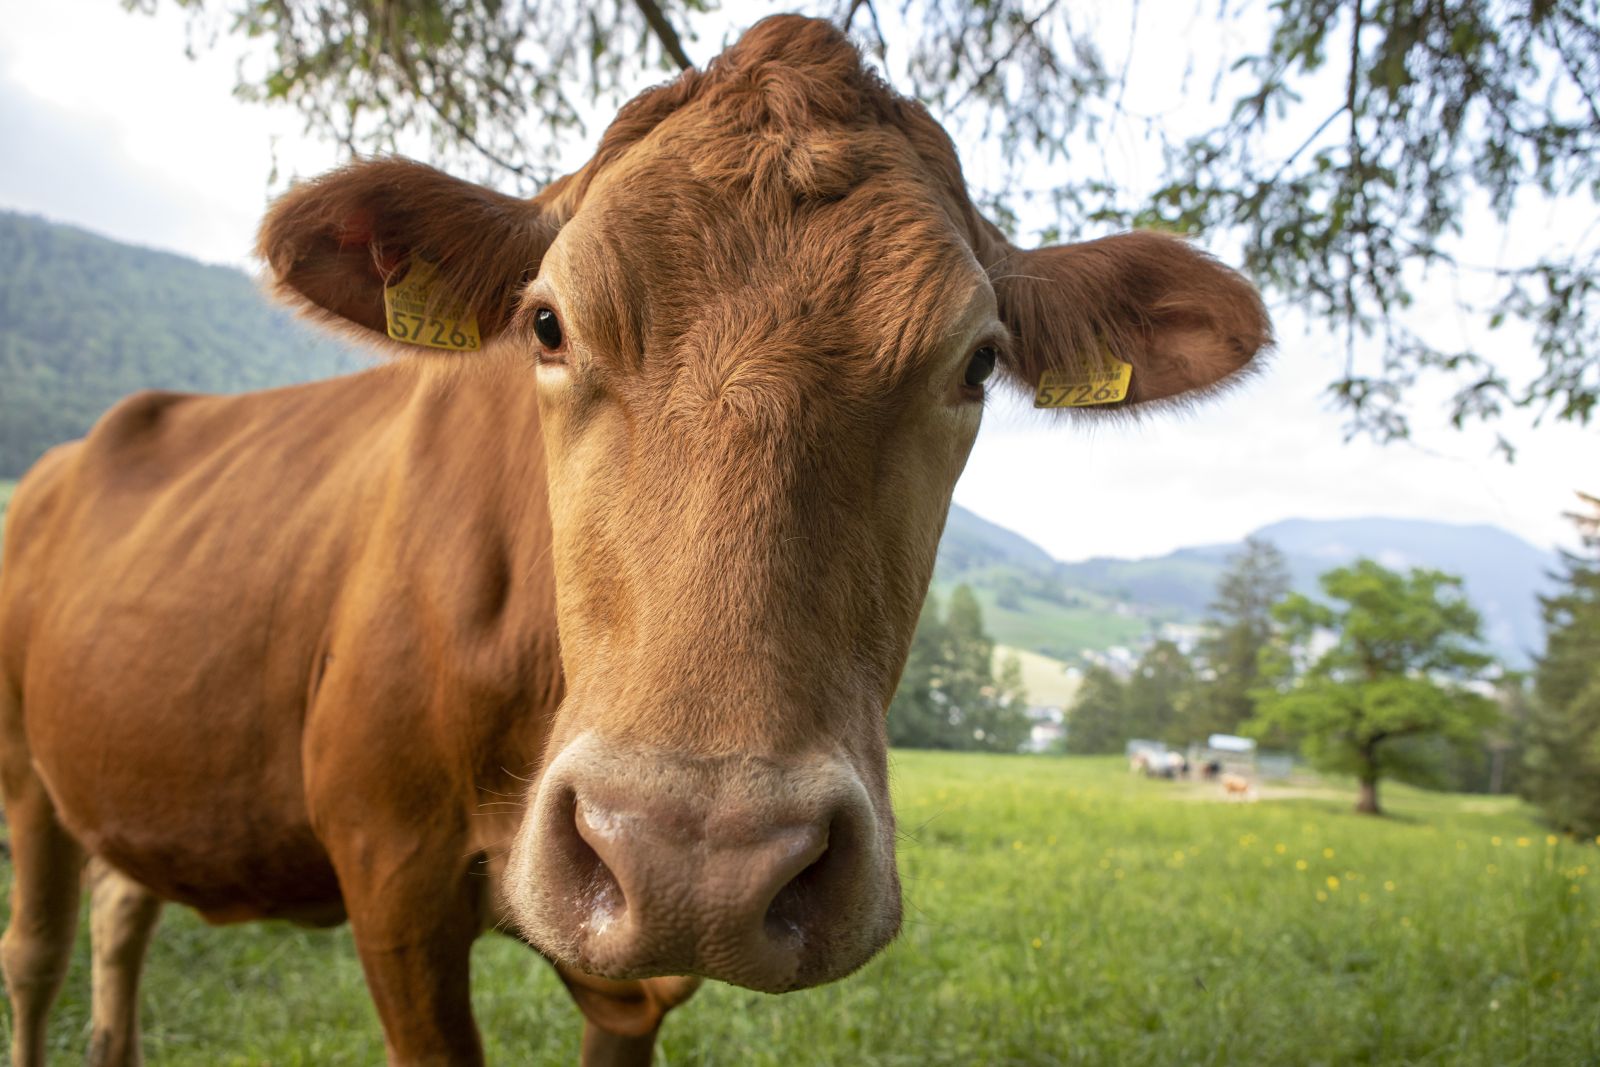 Cattle & Beef - Close up of brown cow in pasture by SaskiaAcht via iStock